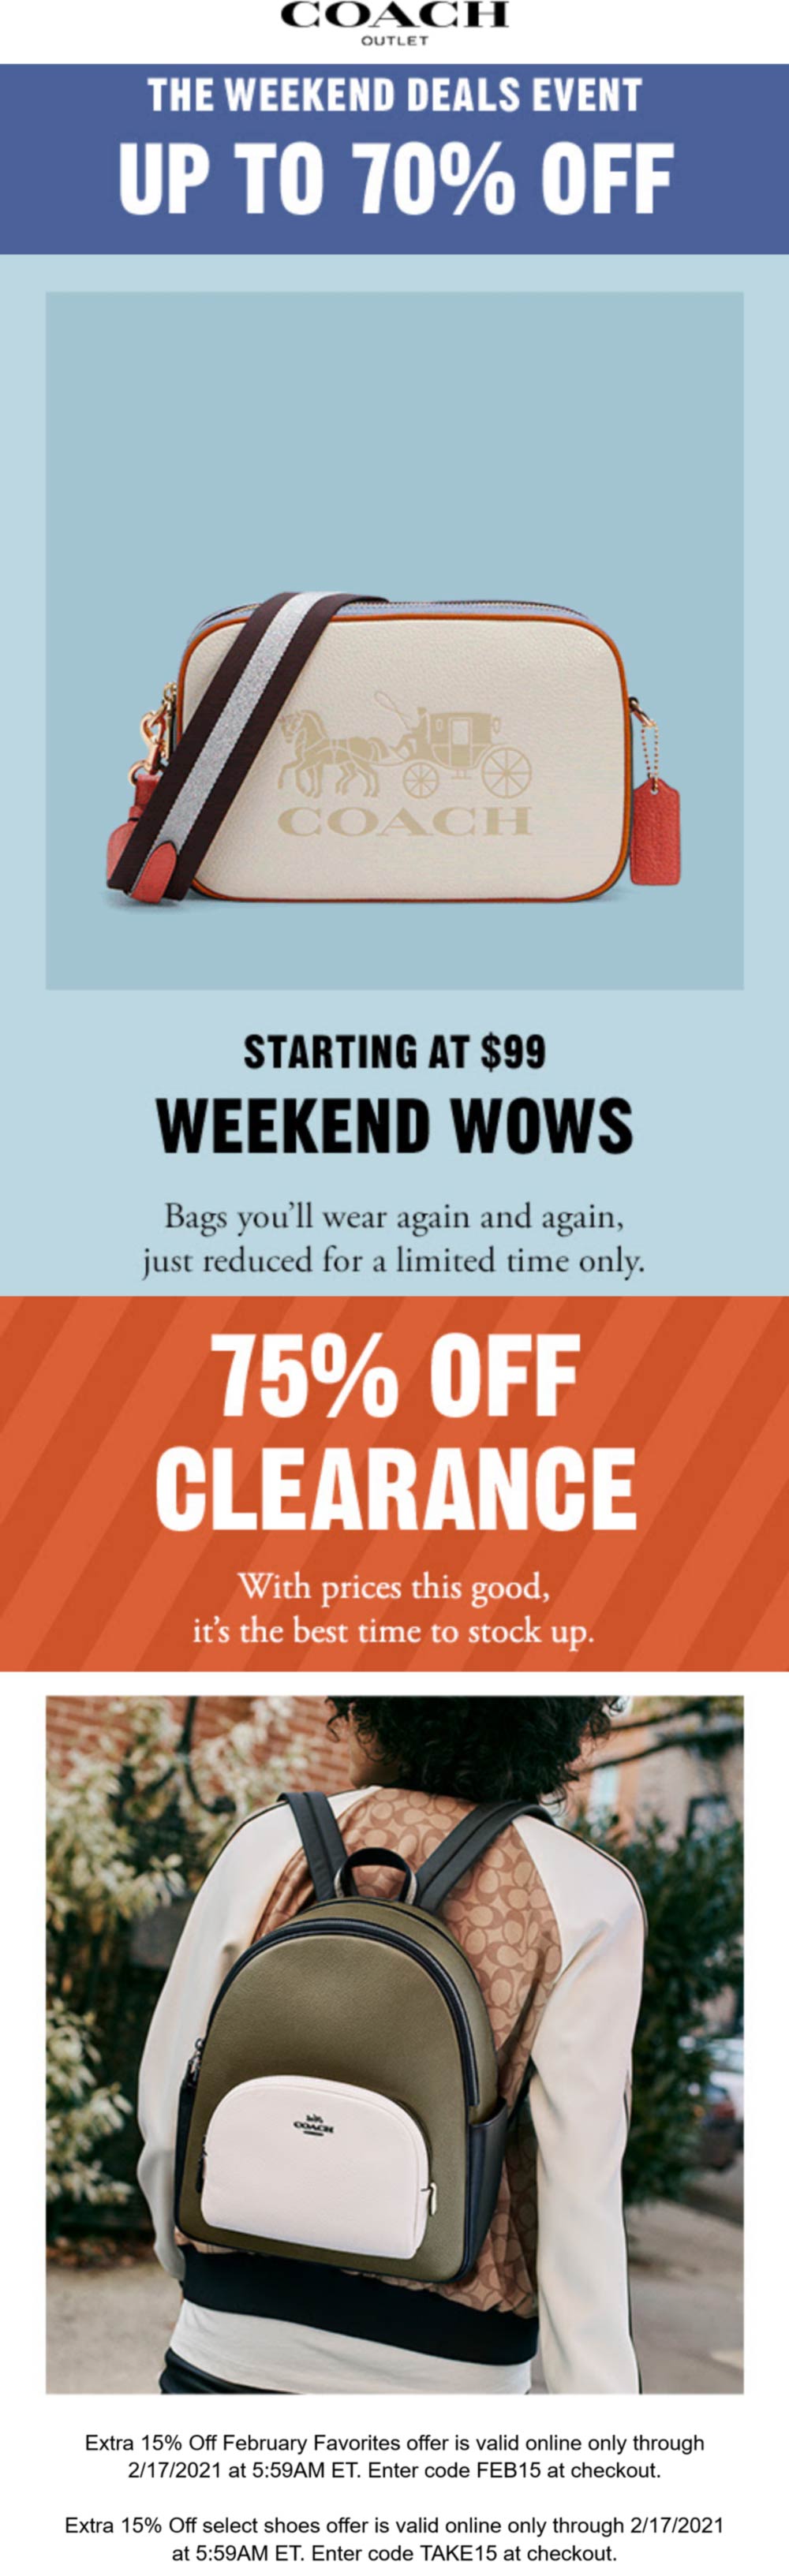 Coach Outlet stores Coupon  75% off clearance at Coach Outlet + 15% off promo codes FEB15 & TAKE15 #coachoutlet 